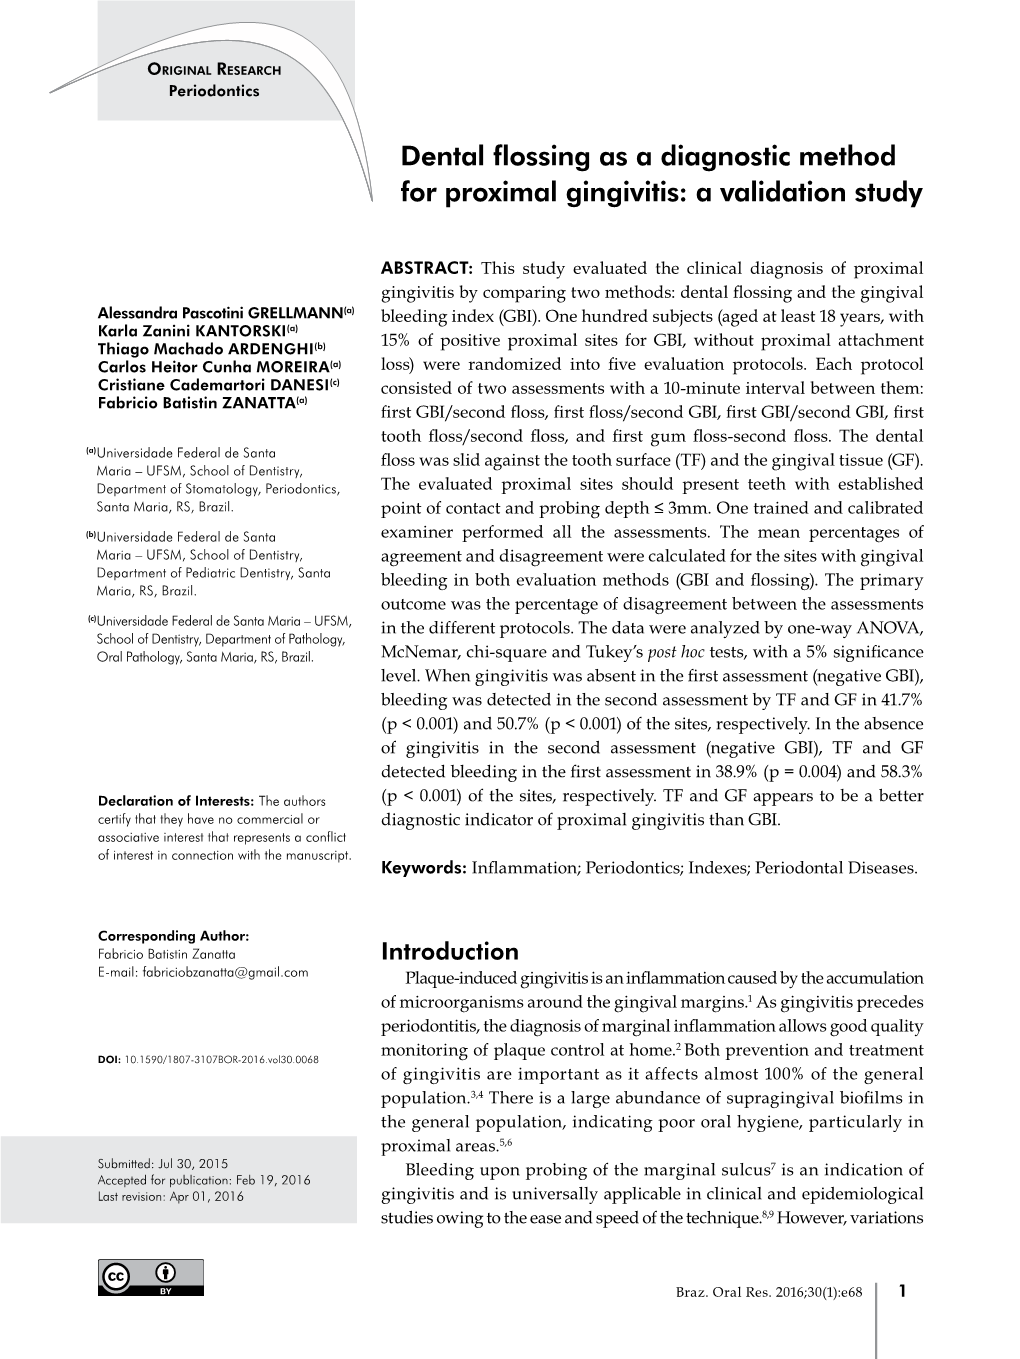 Dental Flossing As a Diagnostic Method for Proximal Gingivitis: a Validation Study